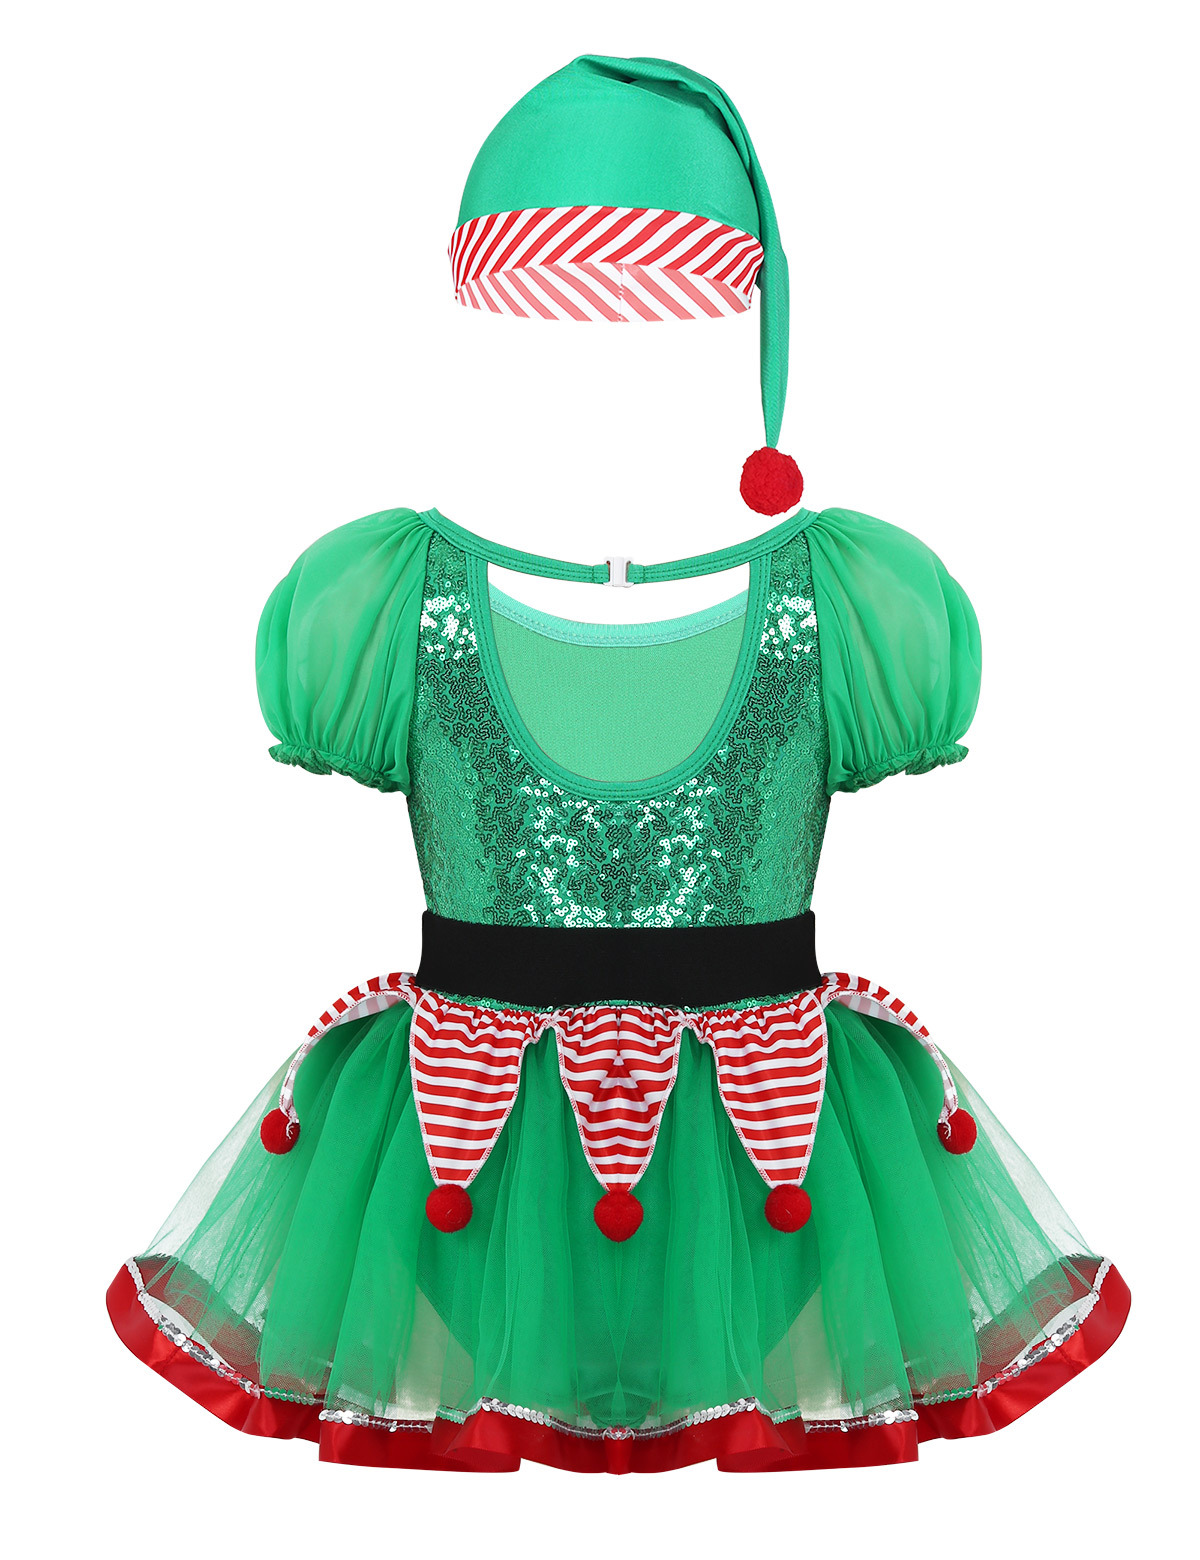 inhzoy Kids Girls Christmas Elf Cosplay Costume Xmas Outfits Sequin Tutu Dress Green 7 - image 2 of 7